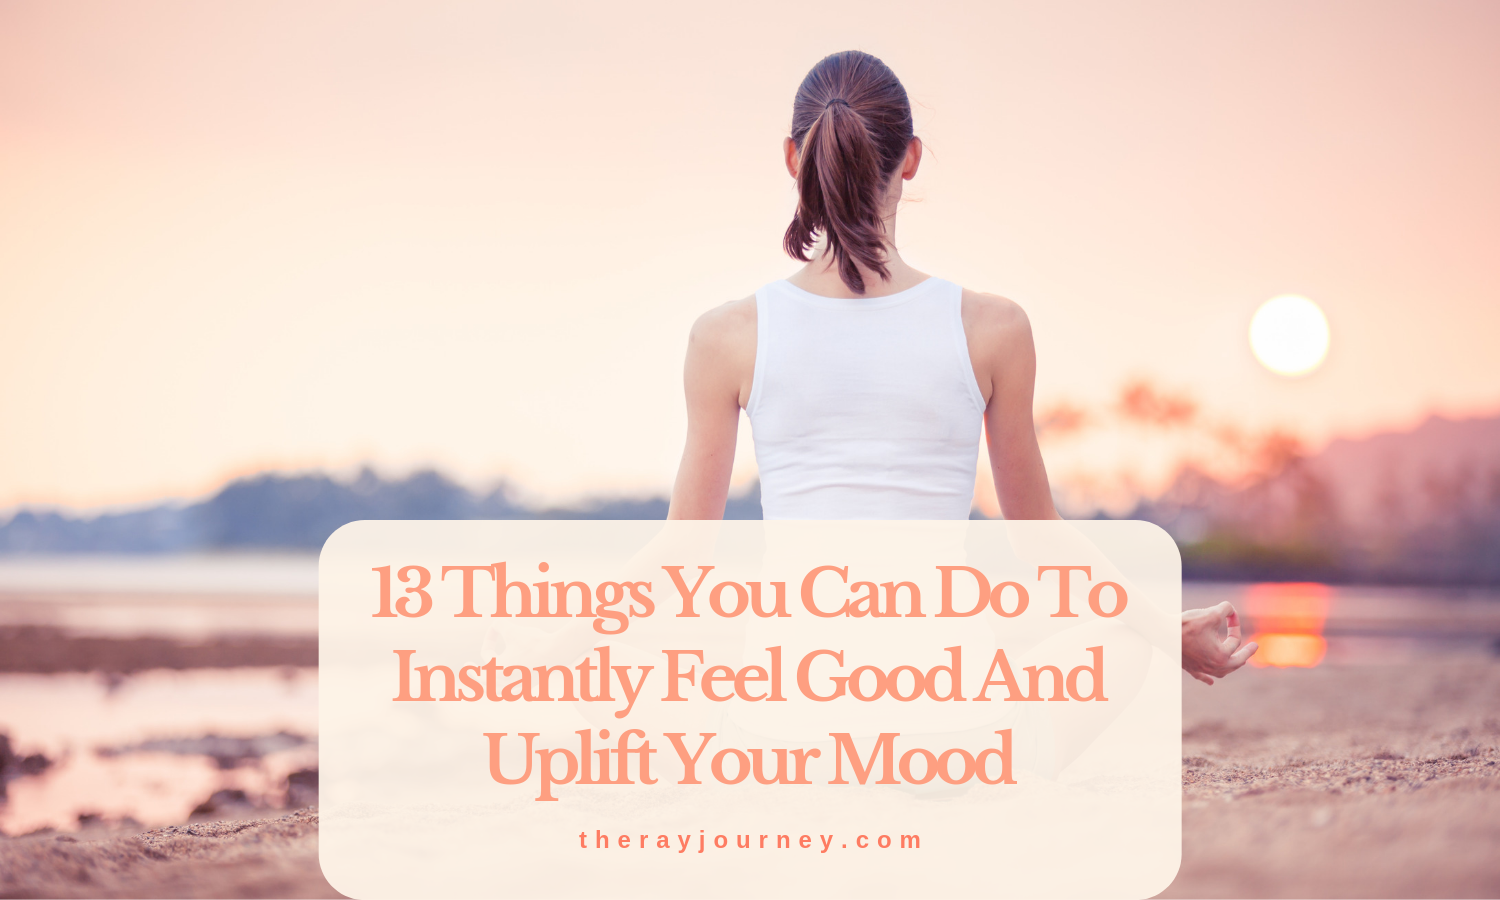 a ray of happiness: 13 things you can do to instantly feel good and uplift your mood